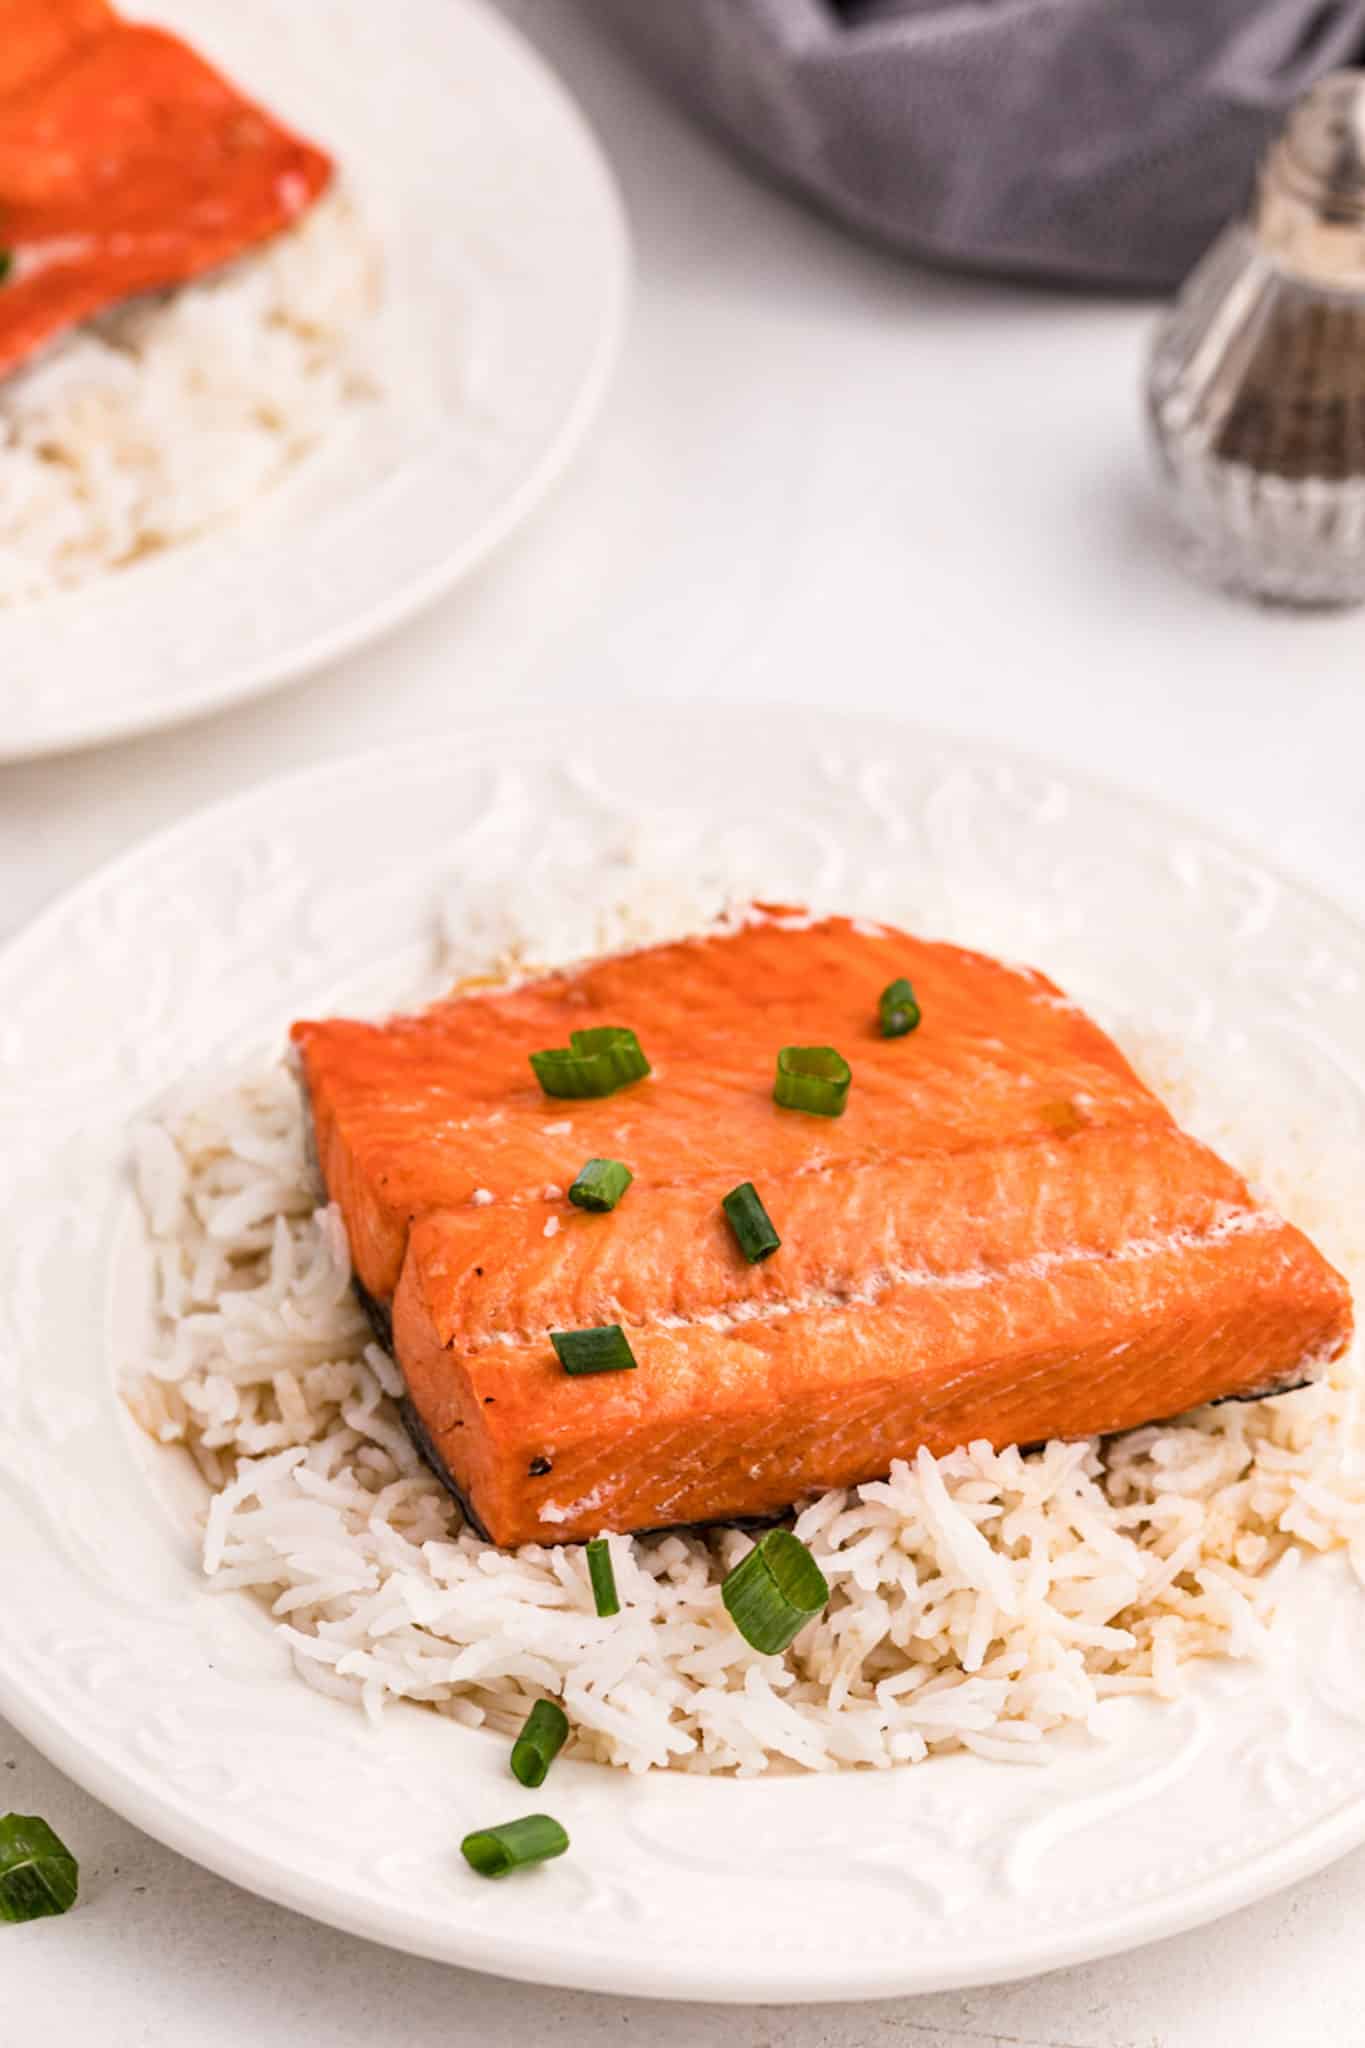 Salmon fillet on a plate with white rice.